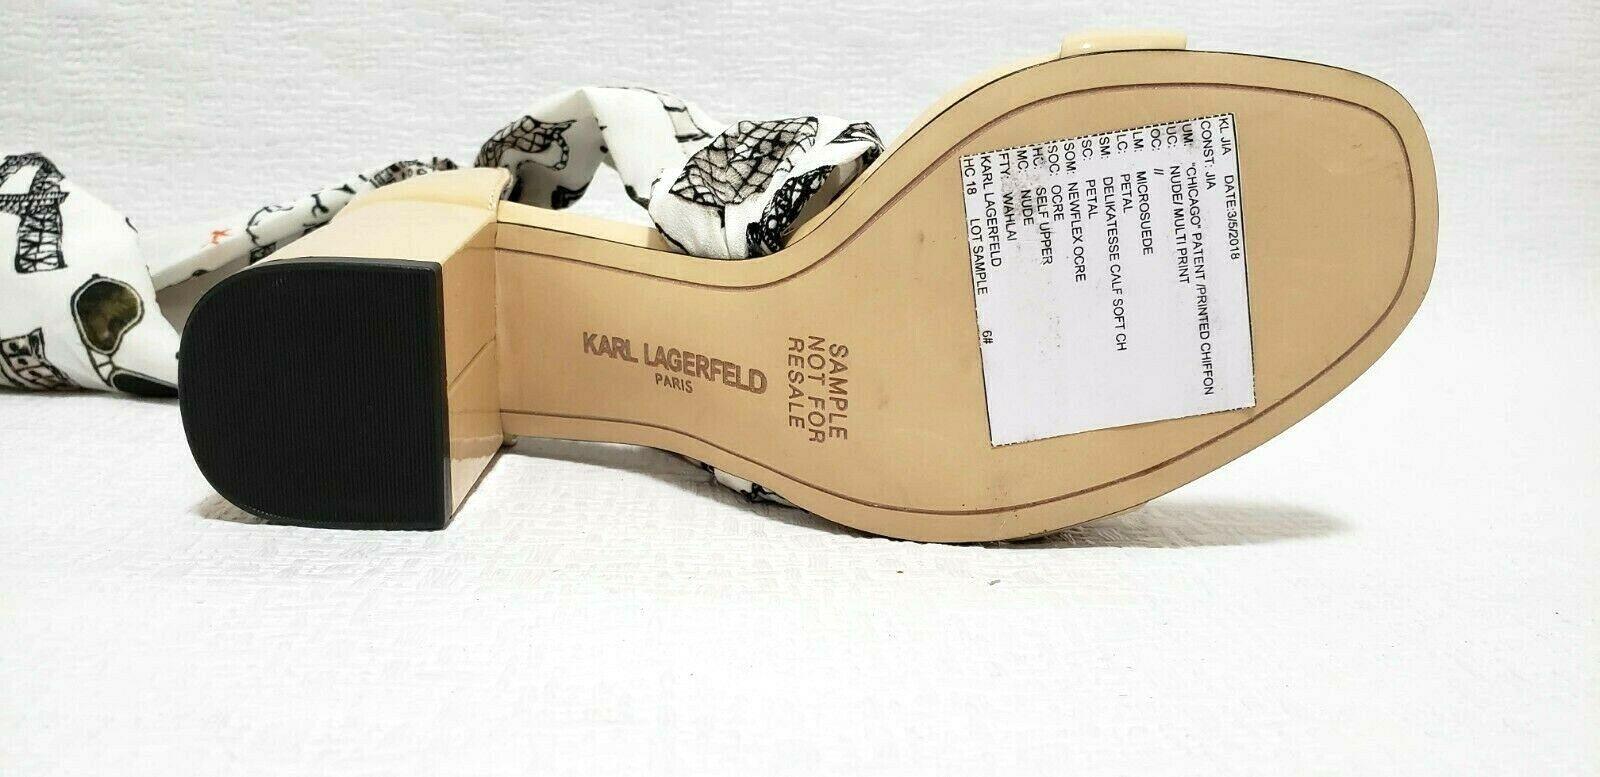 NEW RARE UNIQUE KARL LAGERFELD Leather Pump Sandals Shoes Ankle Wrap Size 6 - SVNYFancy